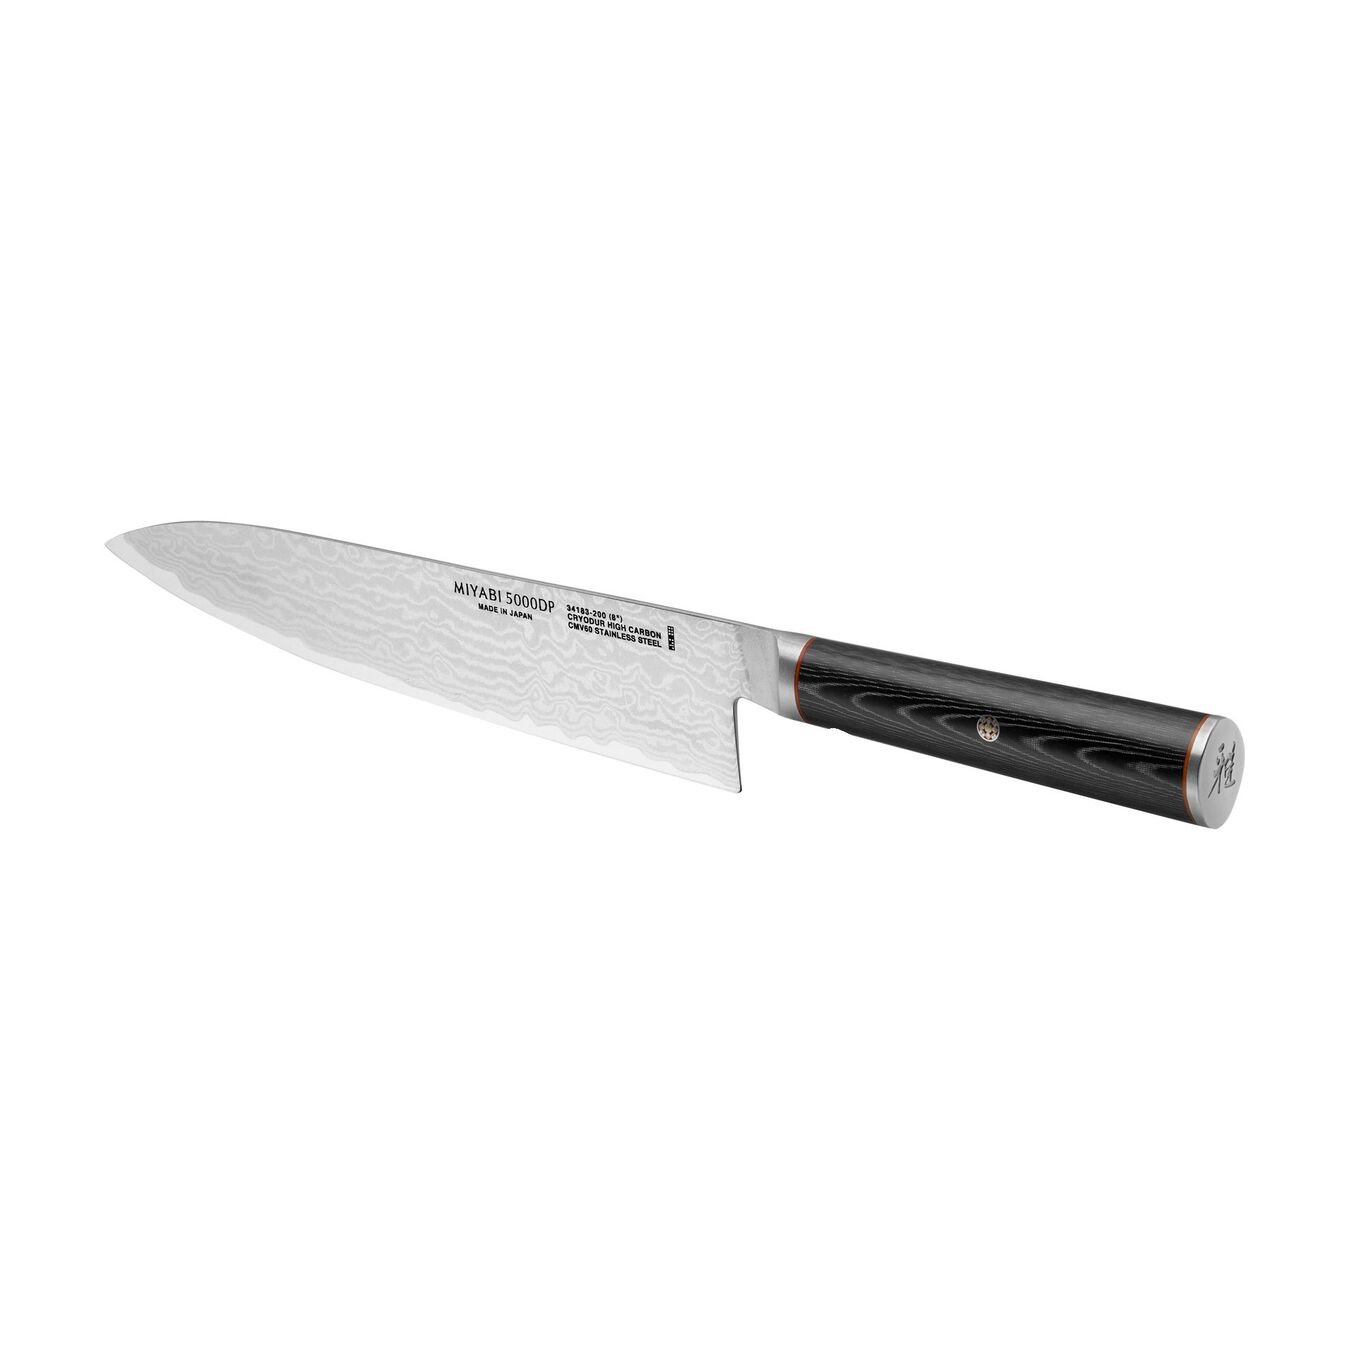 8-inch, Chef's Knife,,large 6